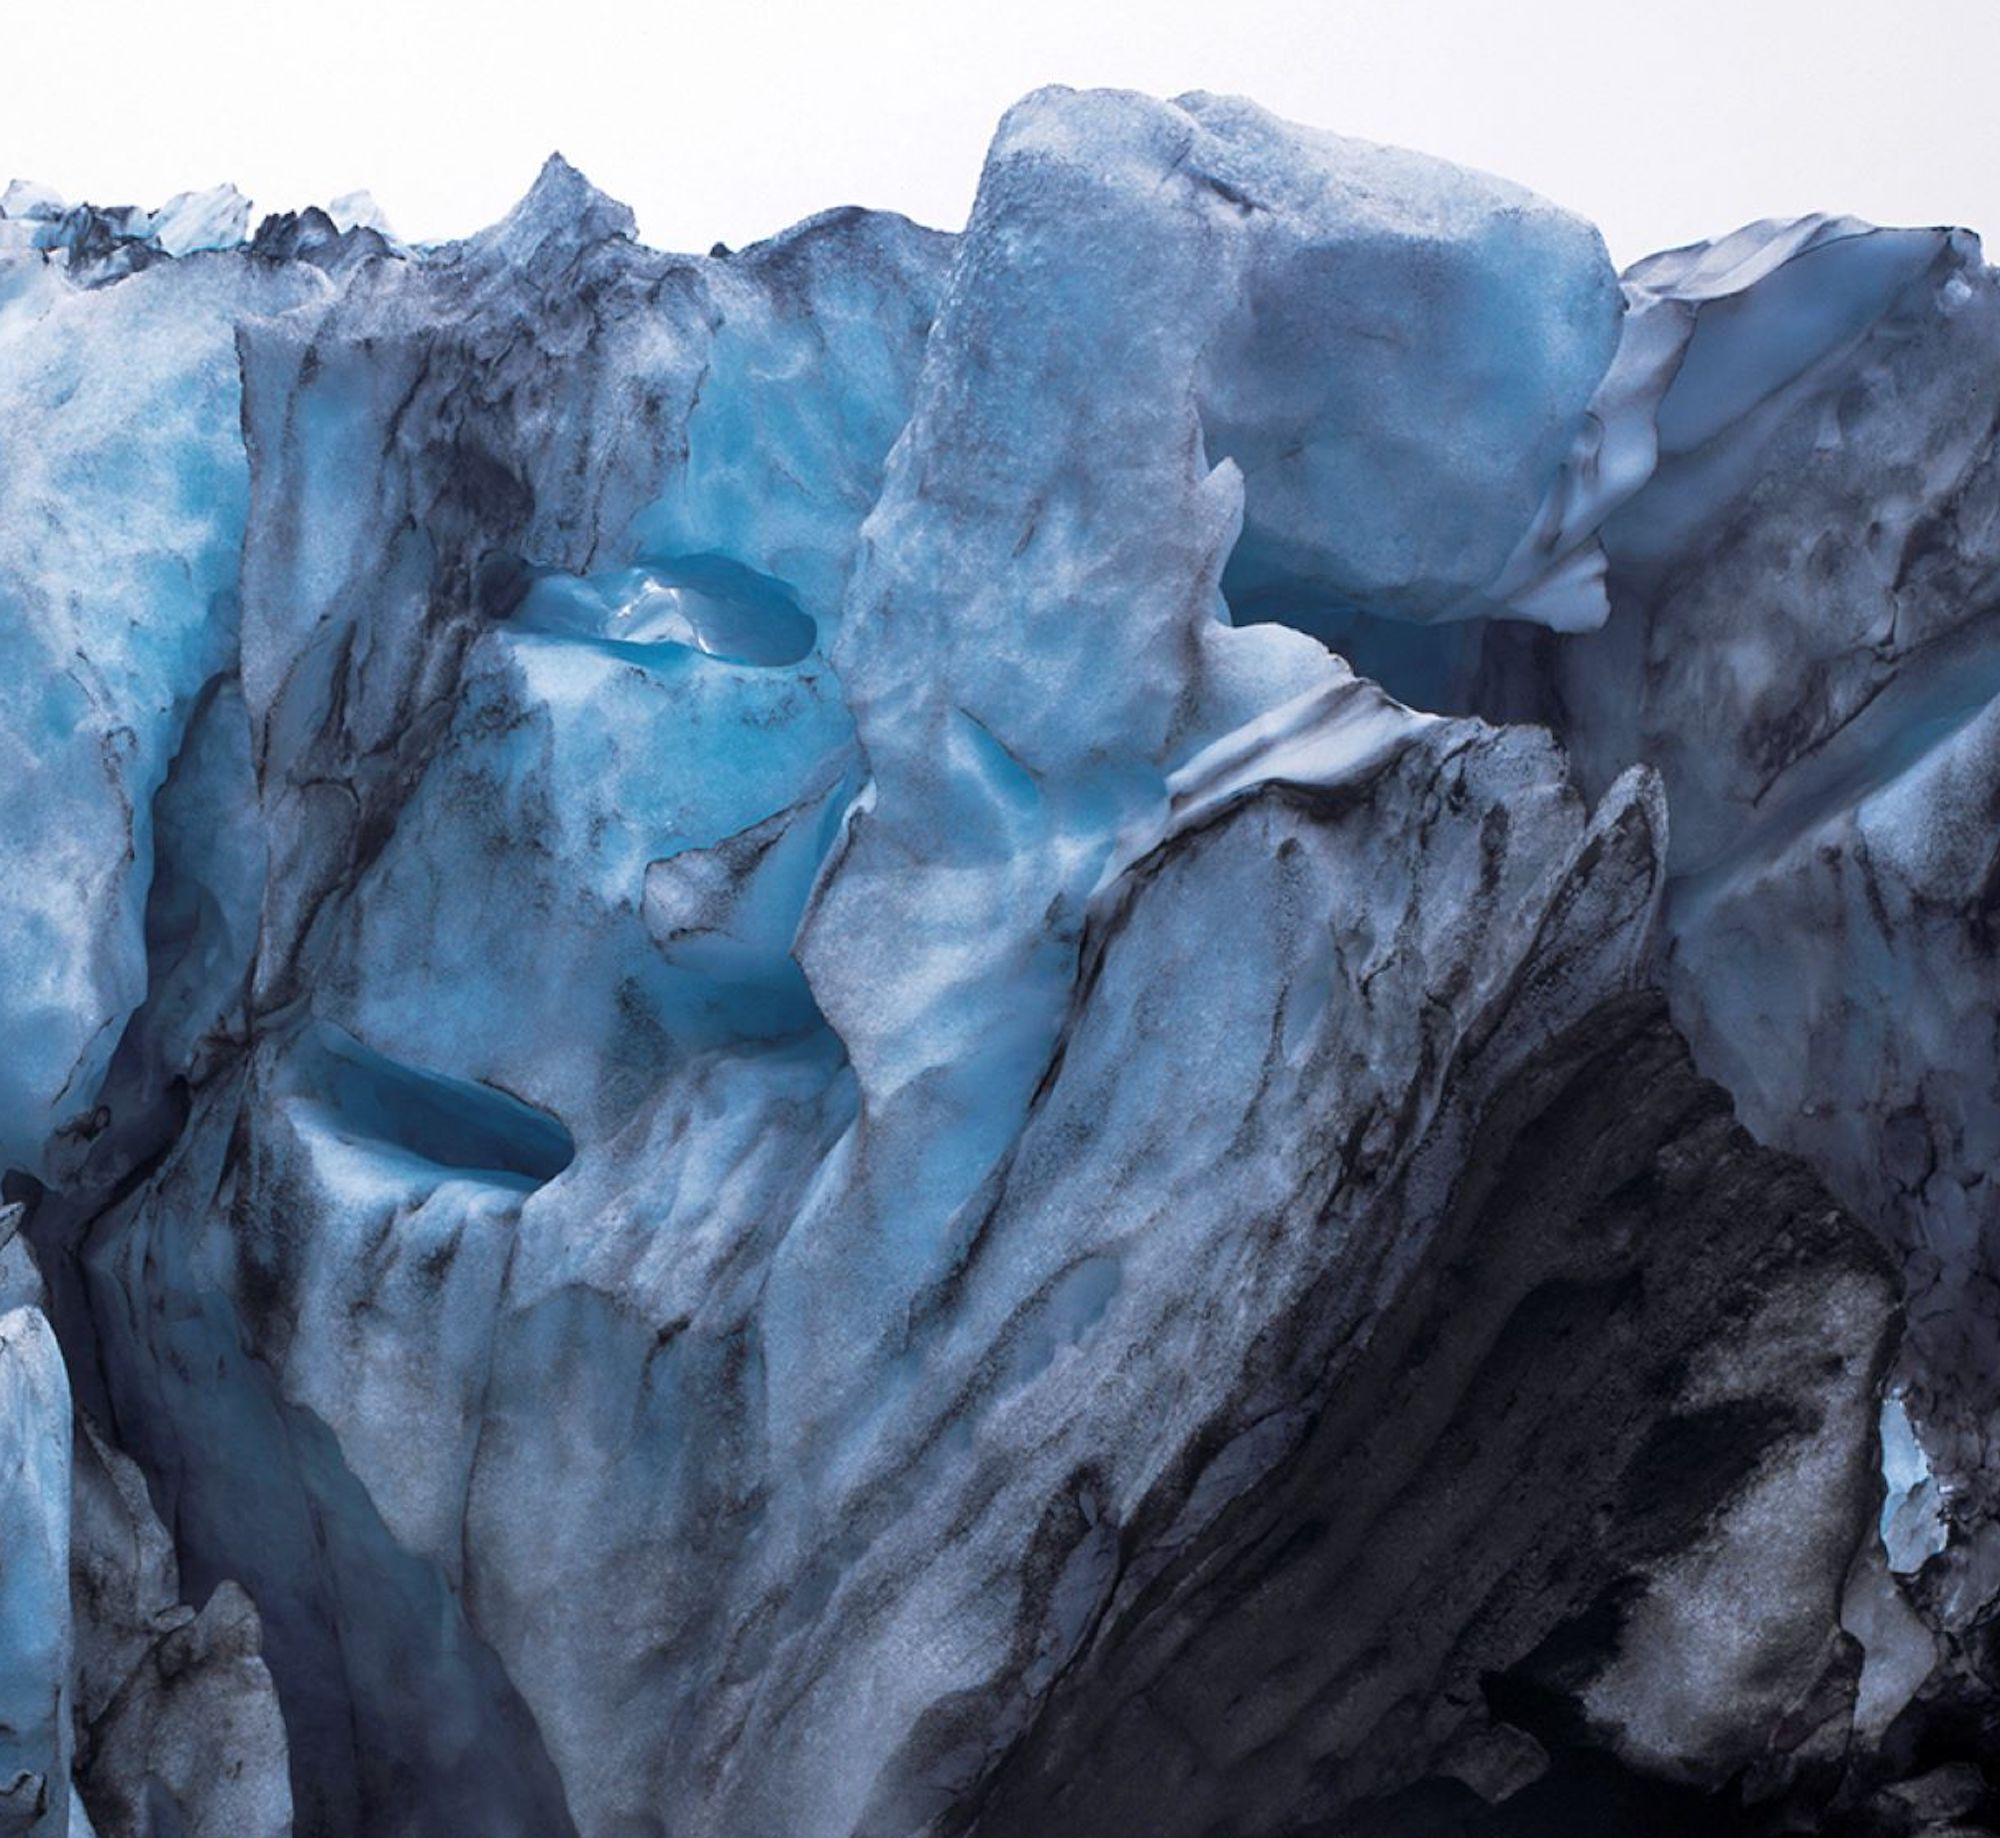 Glacier by Luca Marziale - Landscape photography, ice, winter, blue, Iceland For Sale 3